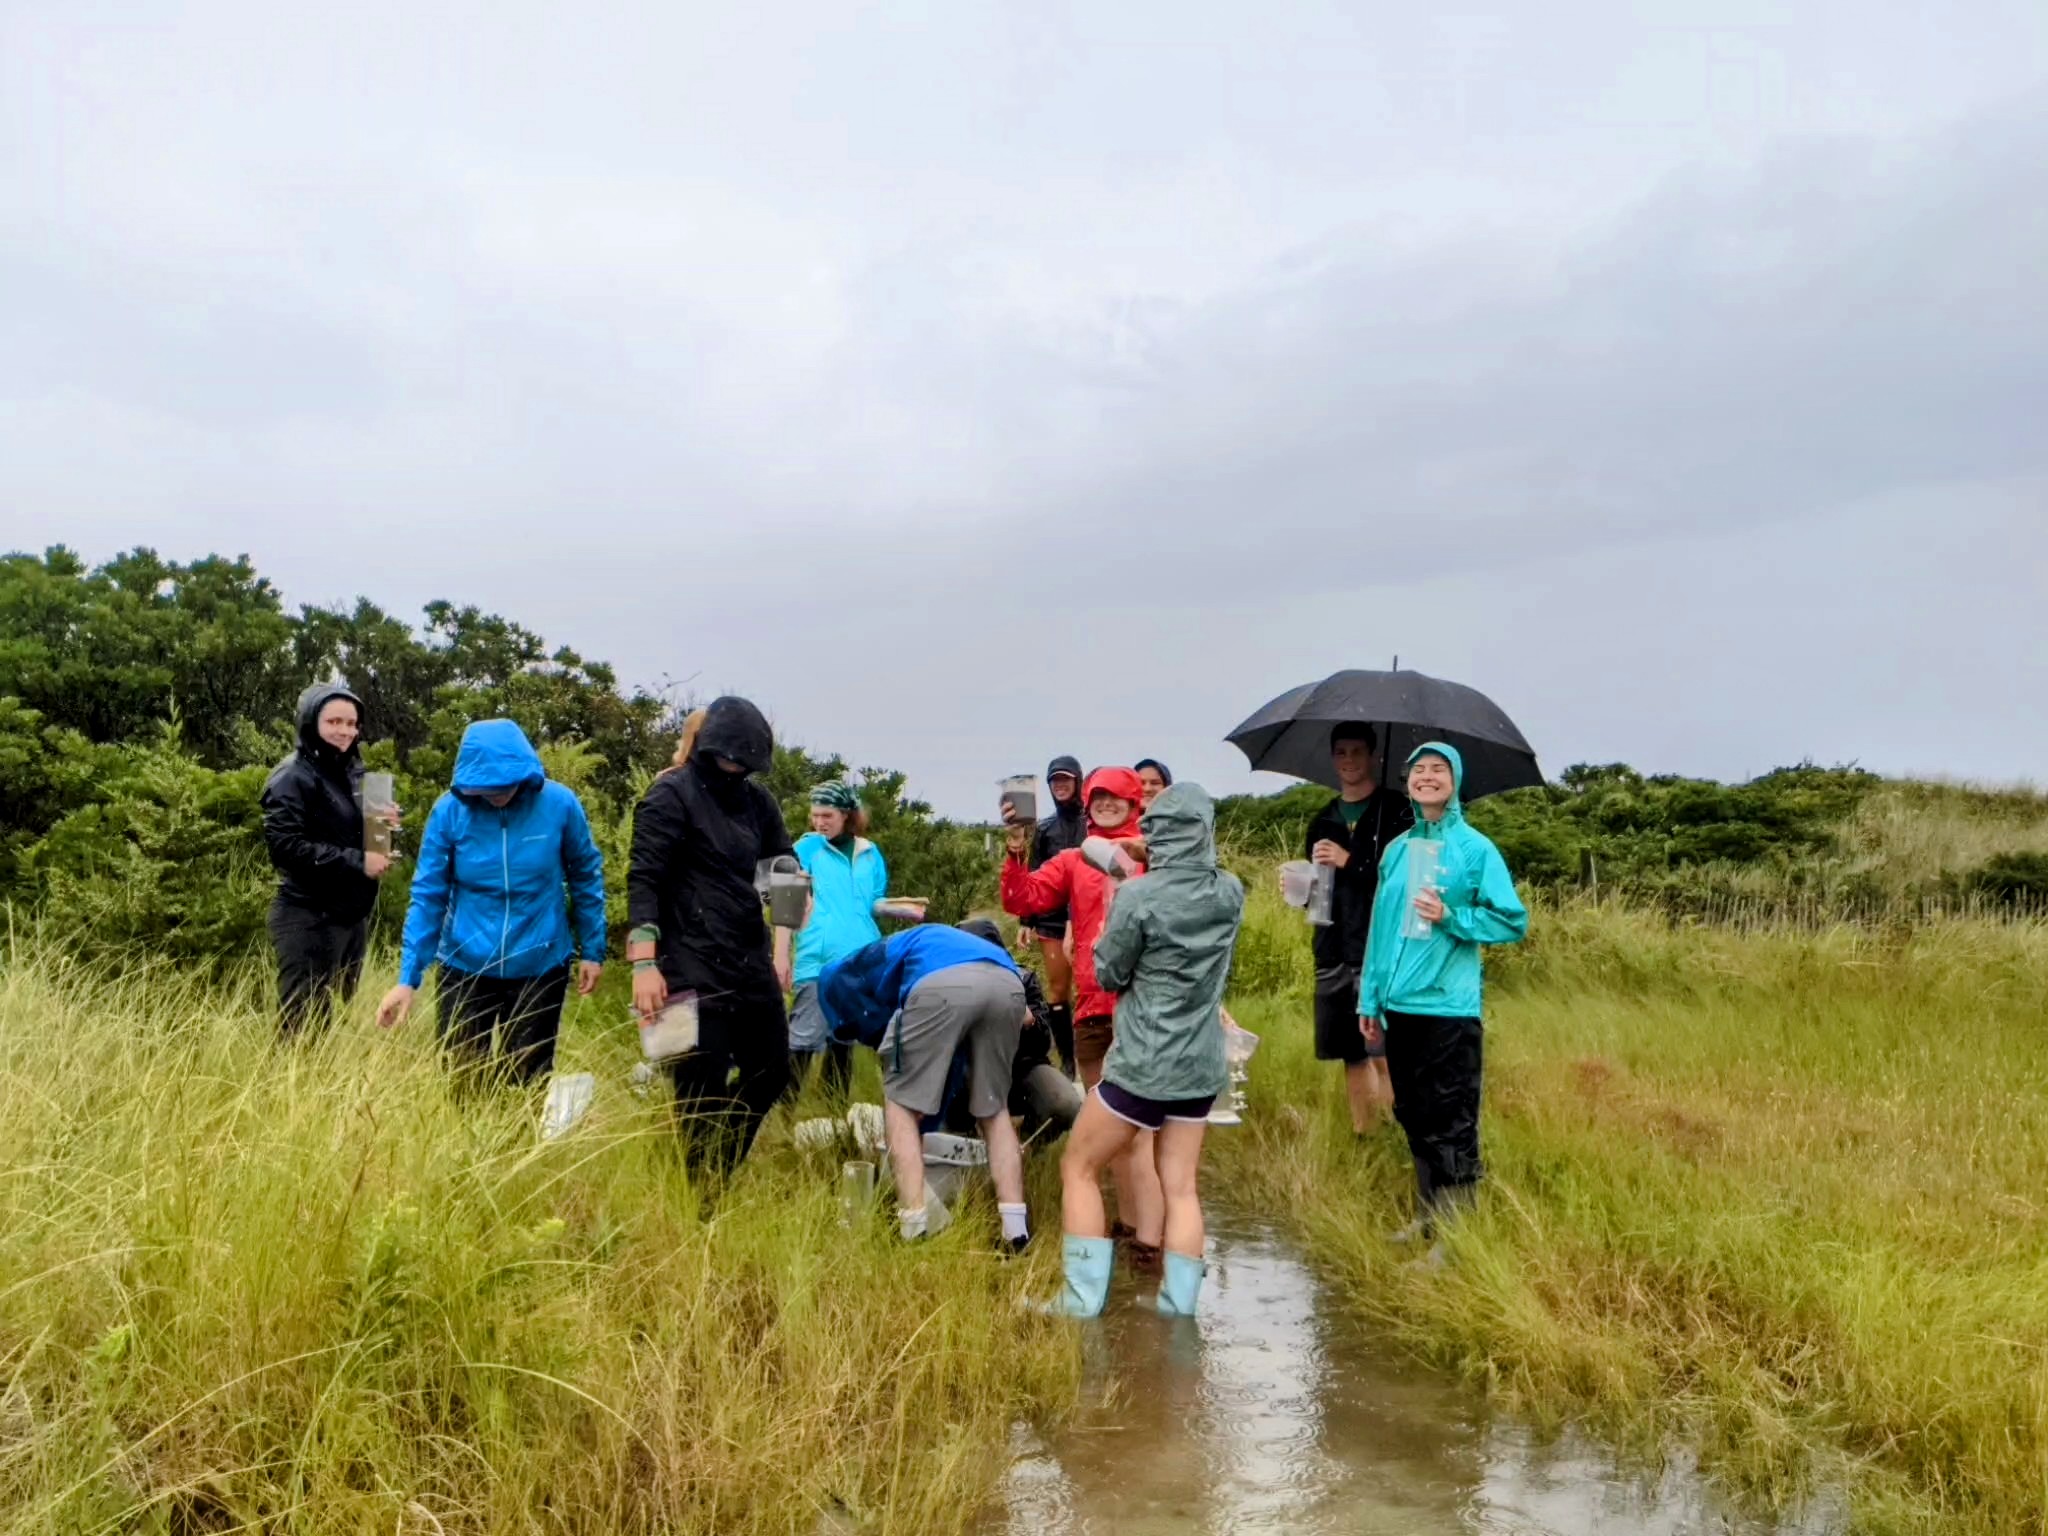 Students from MBL's Semester in Environmental Science headed to Little Sippiwissett Marsh to collect samples -- in spite of the rain.